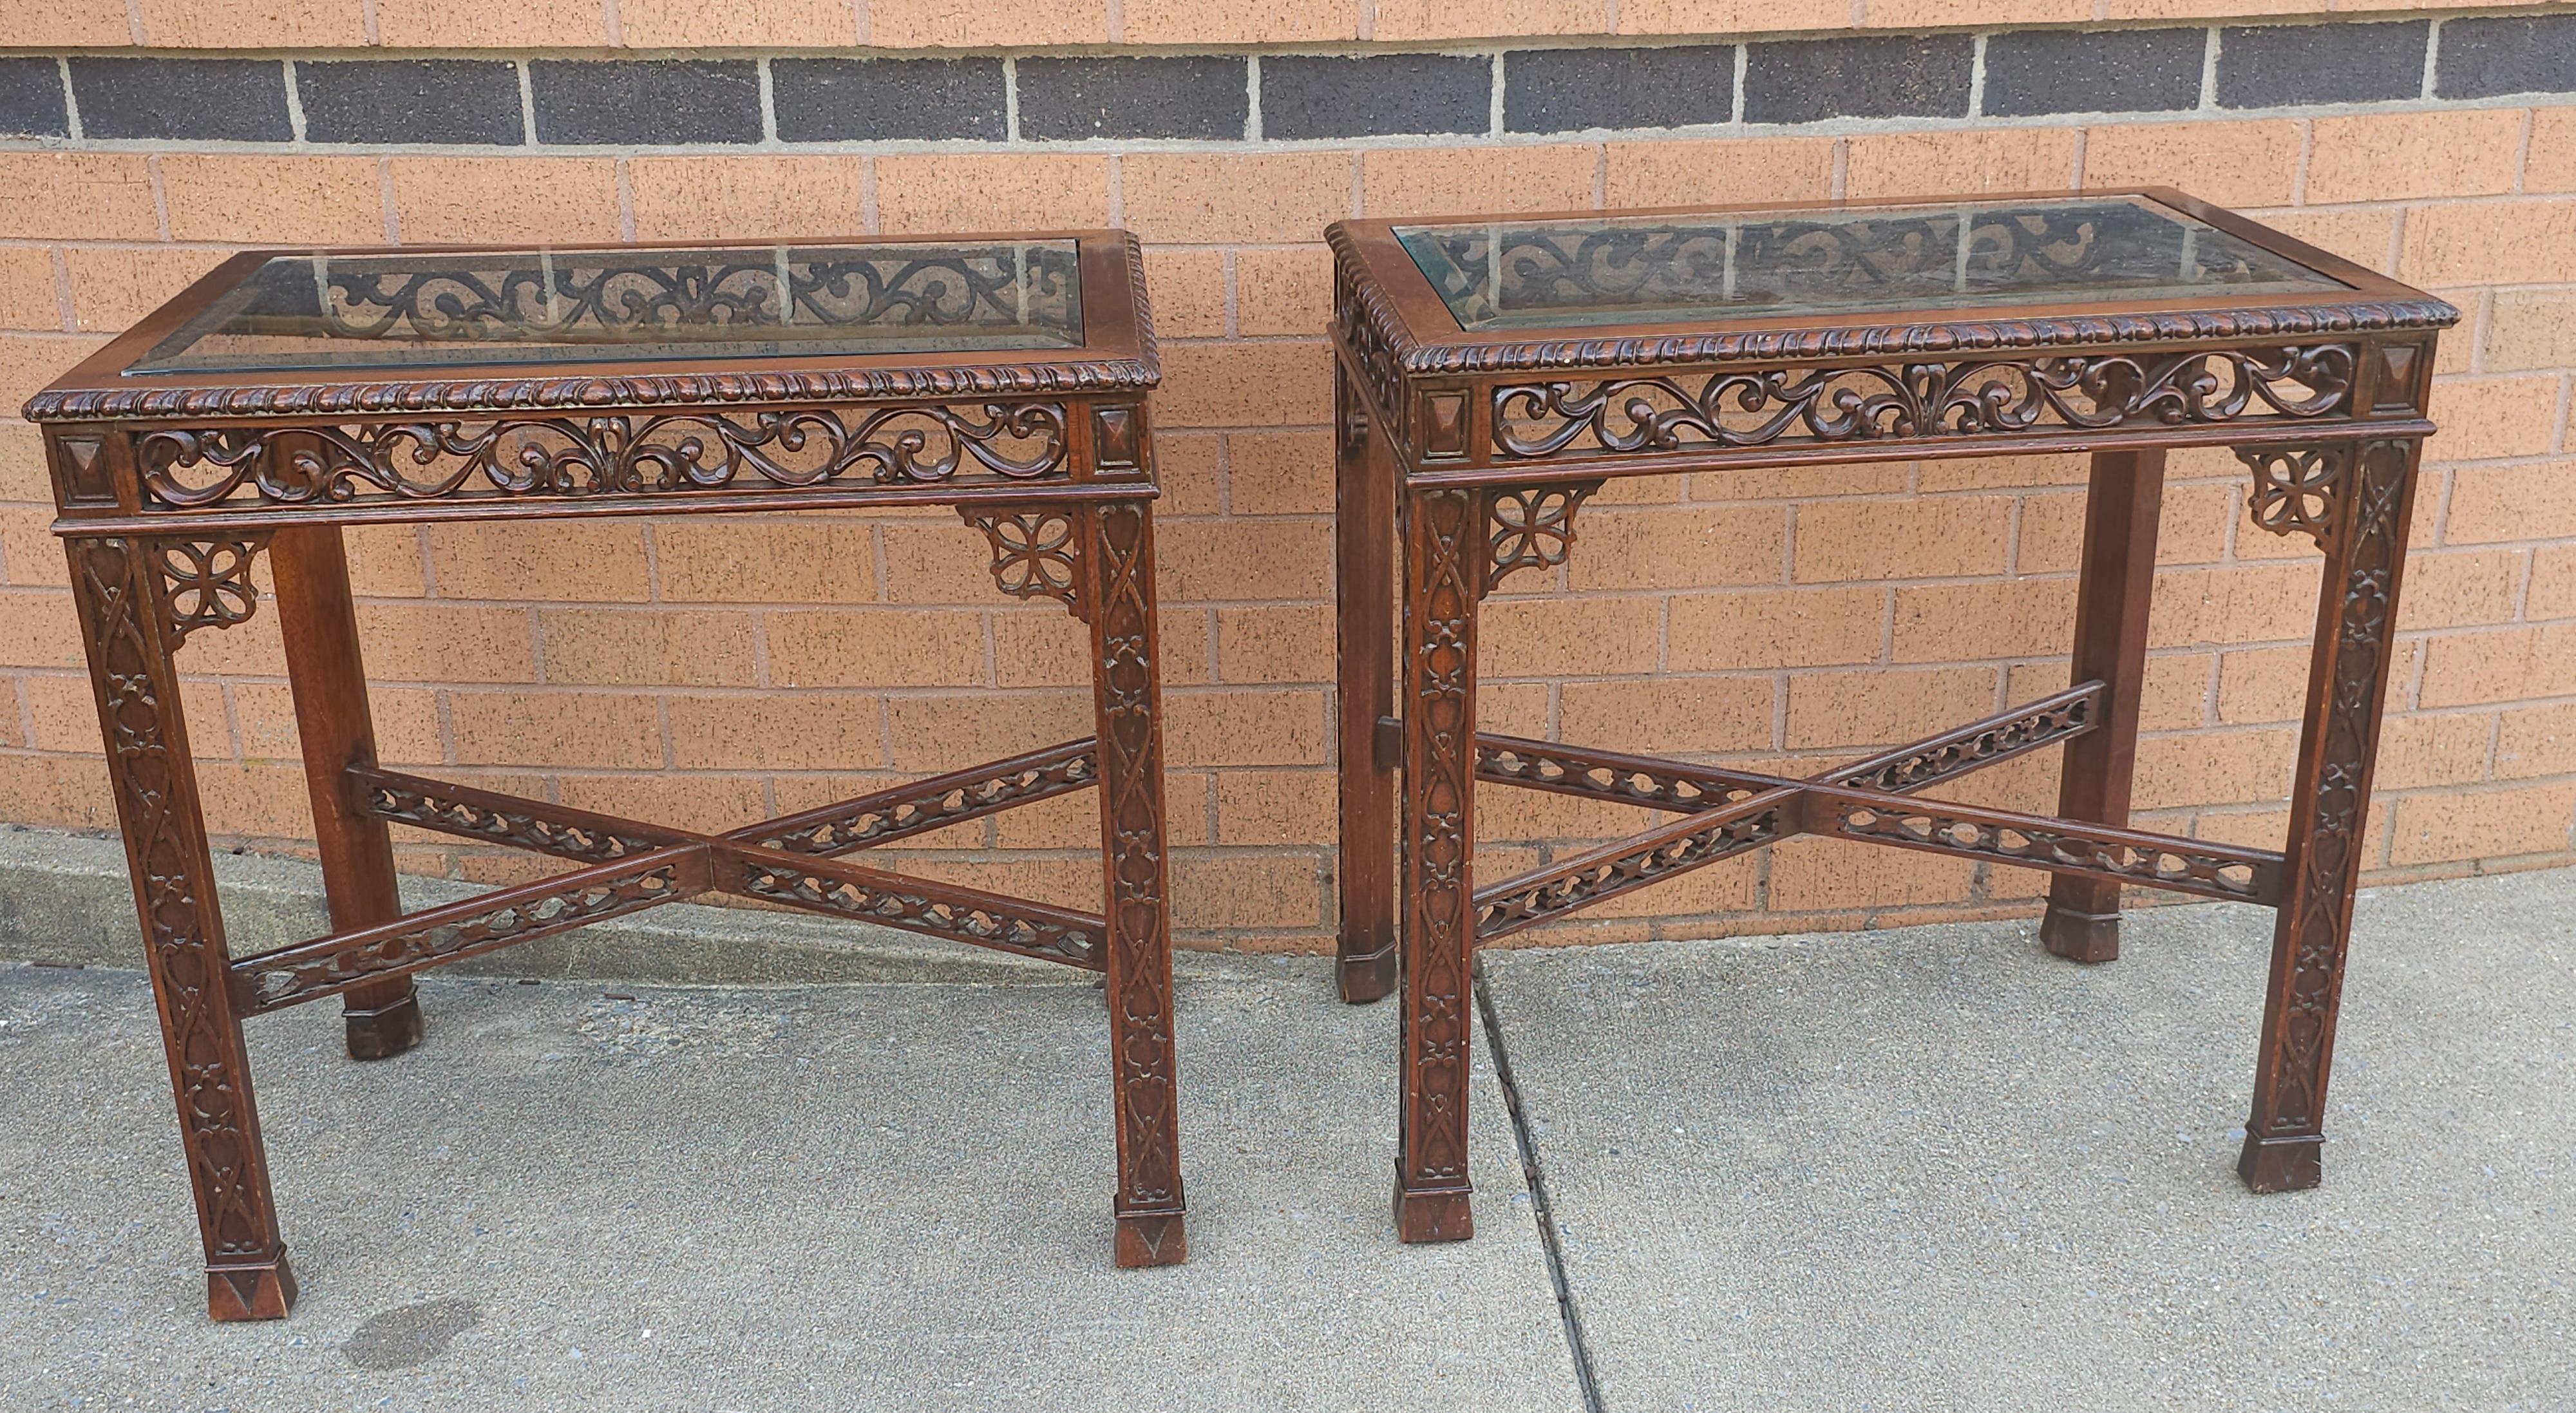 Pair Of Chinese Chippendale Style Fretwork and Glass Inset Mahogany Side Tables For Sale 2